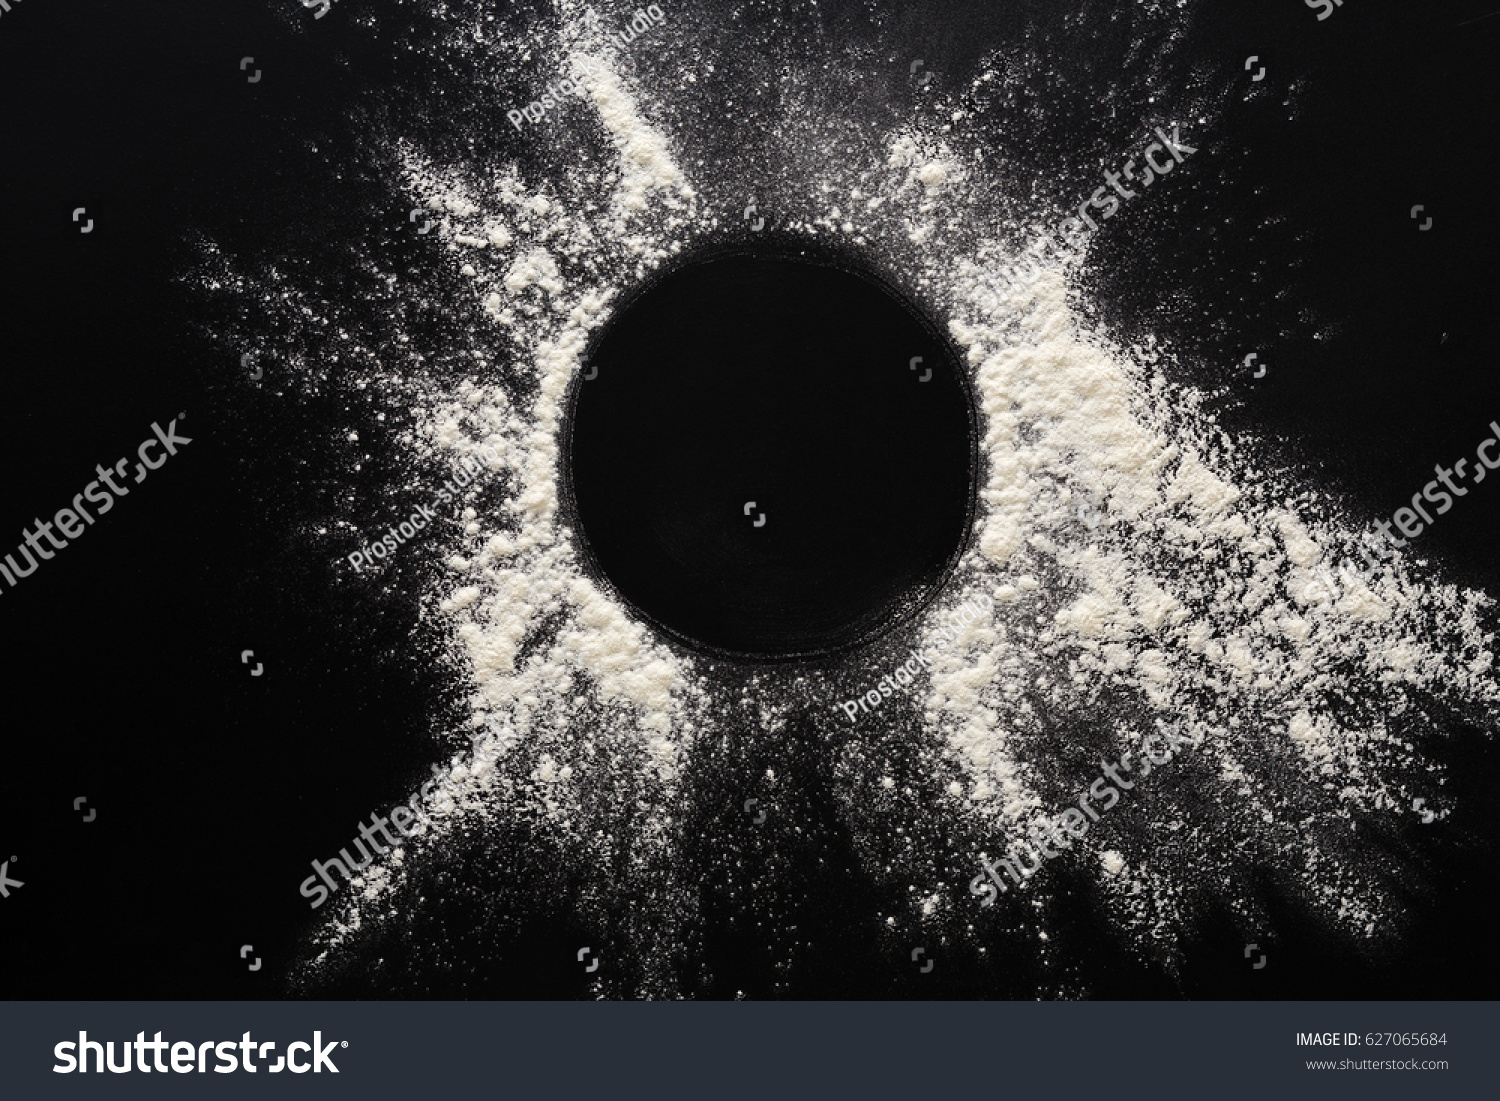 Abstract background. Sprinkled wheat flour circle, round spot on black. Top view on blackboard. Baking concept, cooking dough or pastry. #627065684